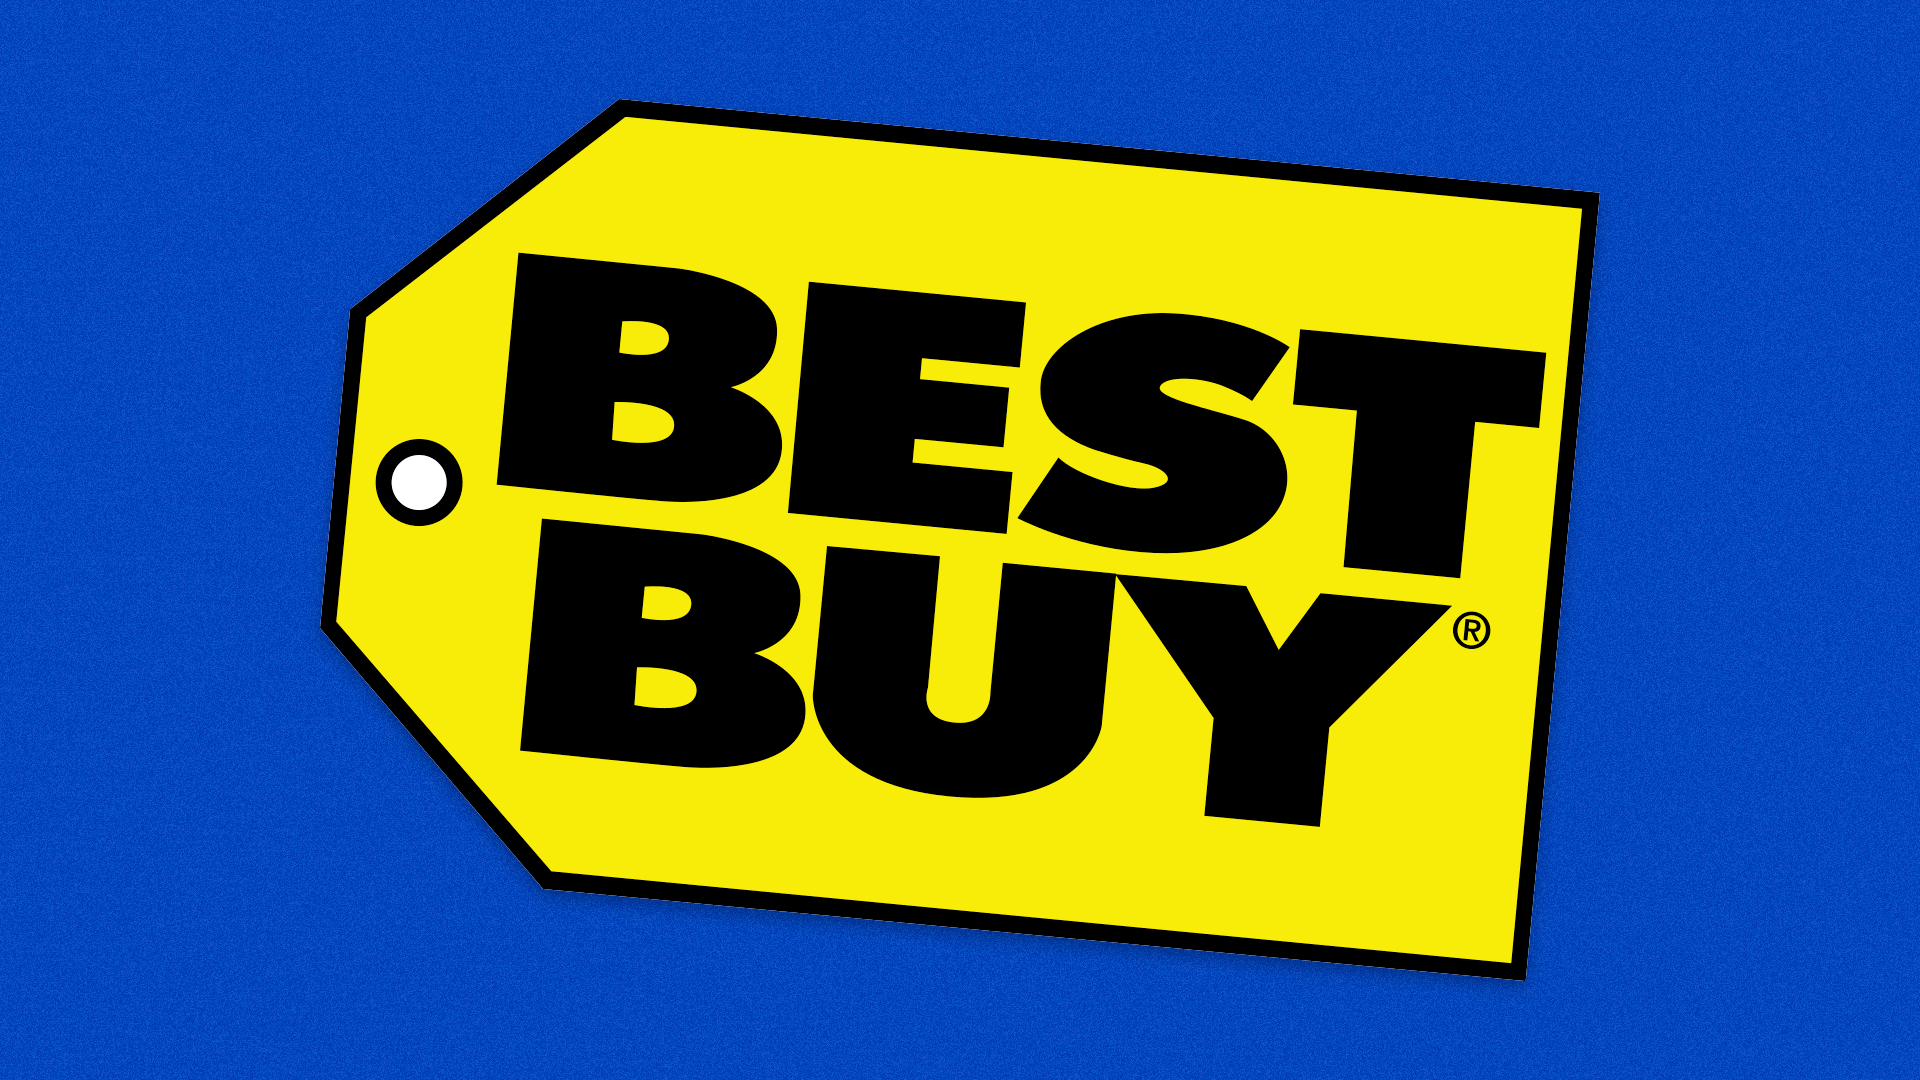 The Best Buy logo on a blue background.